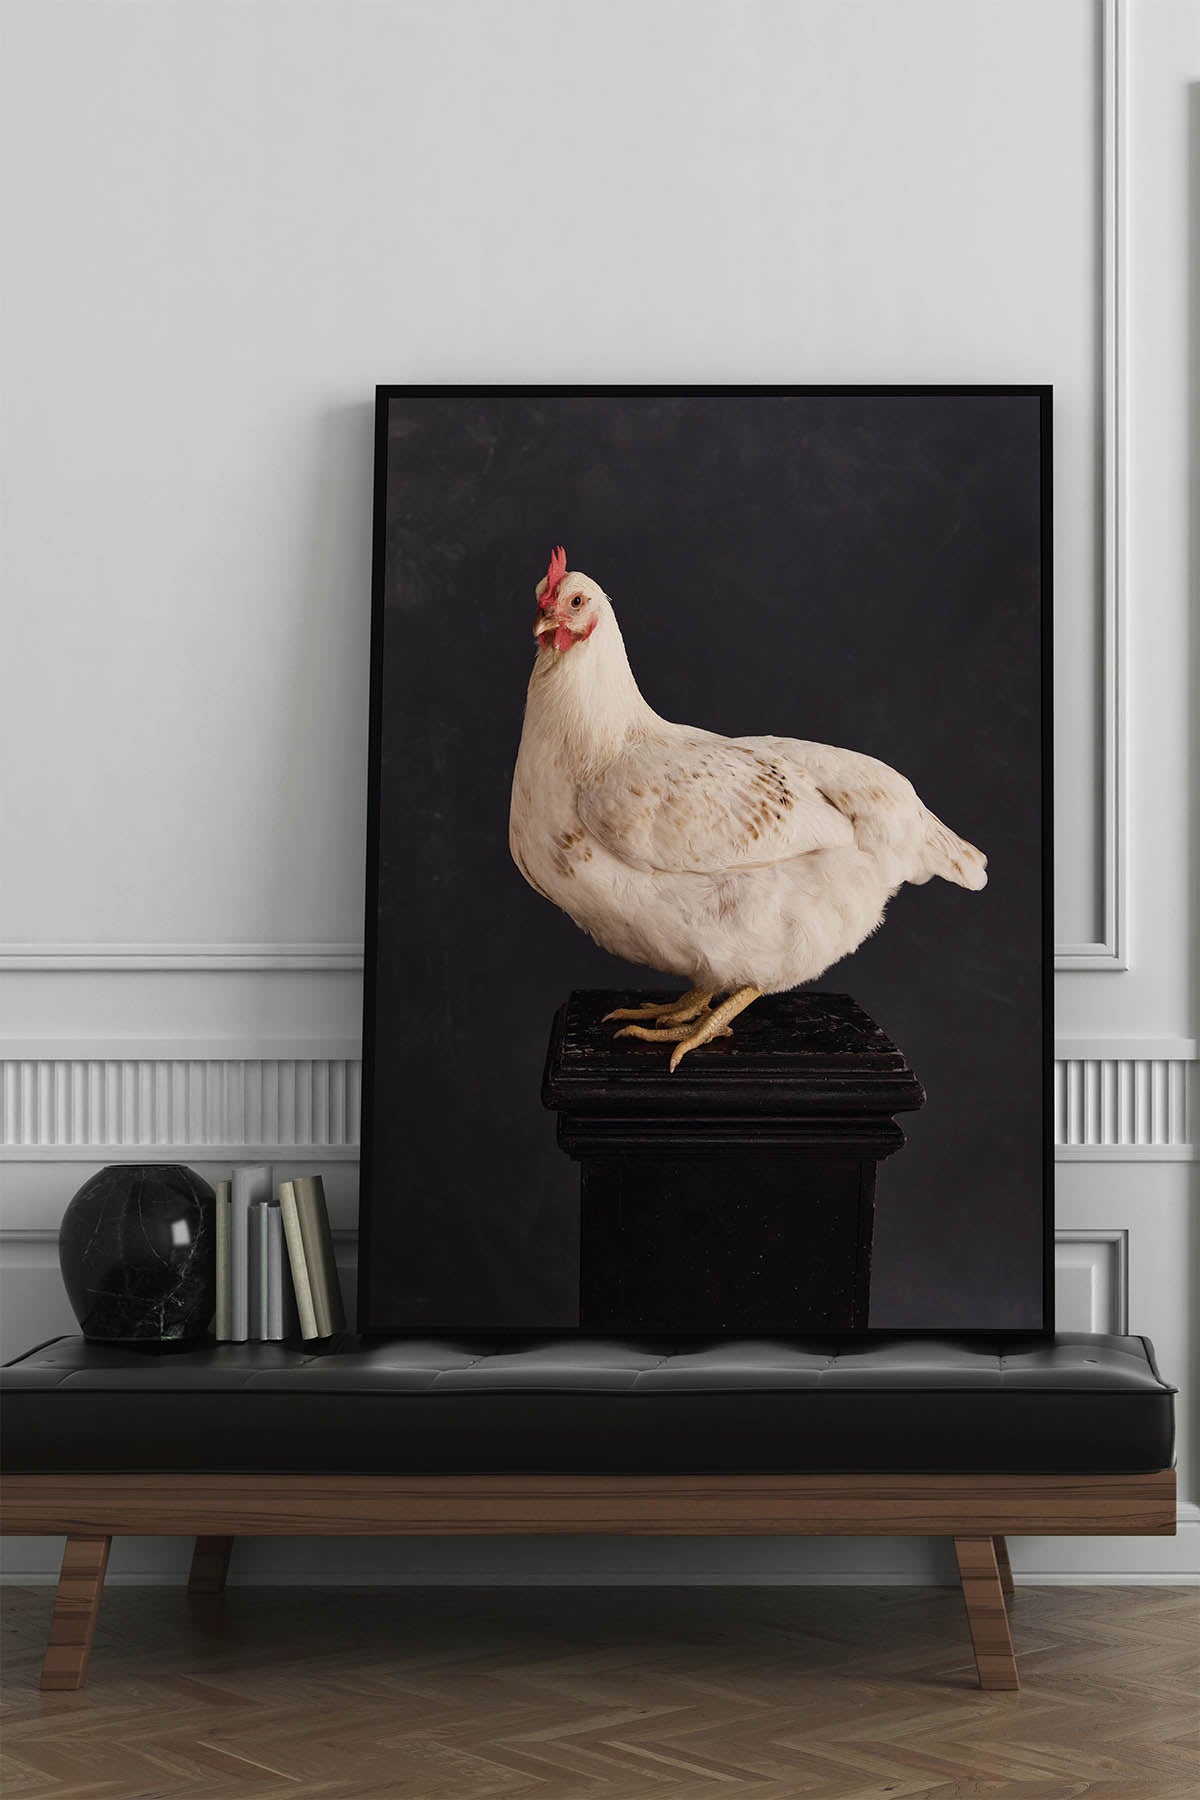 Fine Art Print Of A White Chicken Standing On A Black Plinth With A Black Background Framed On A Wall In An European Style Entry Way and Black Leather Bench.